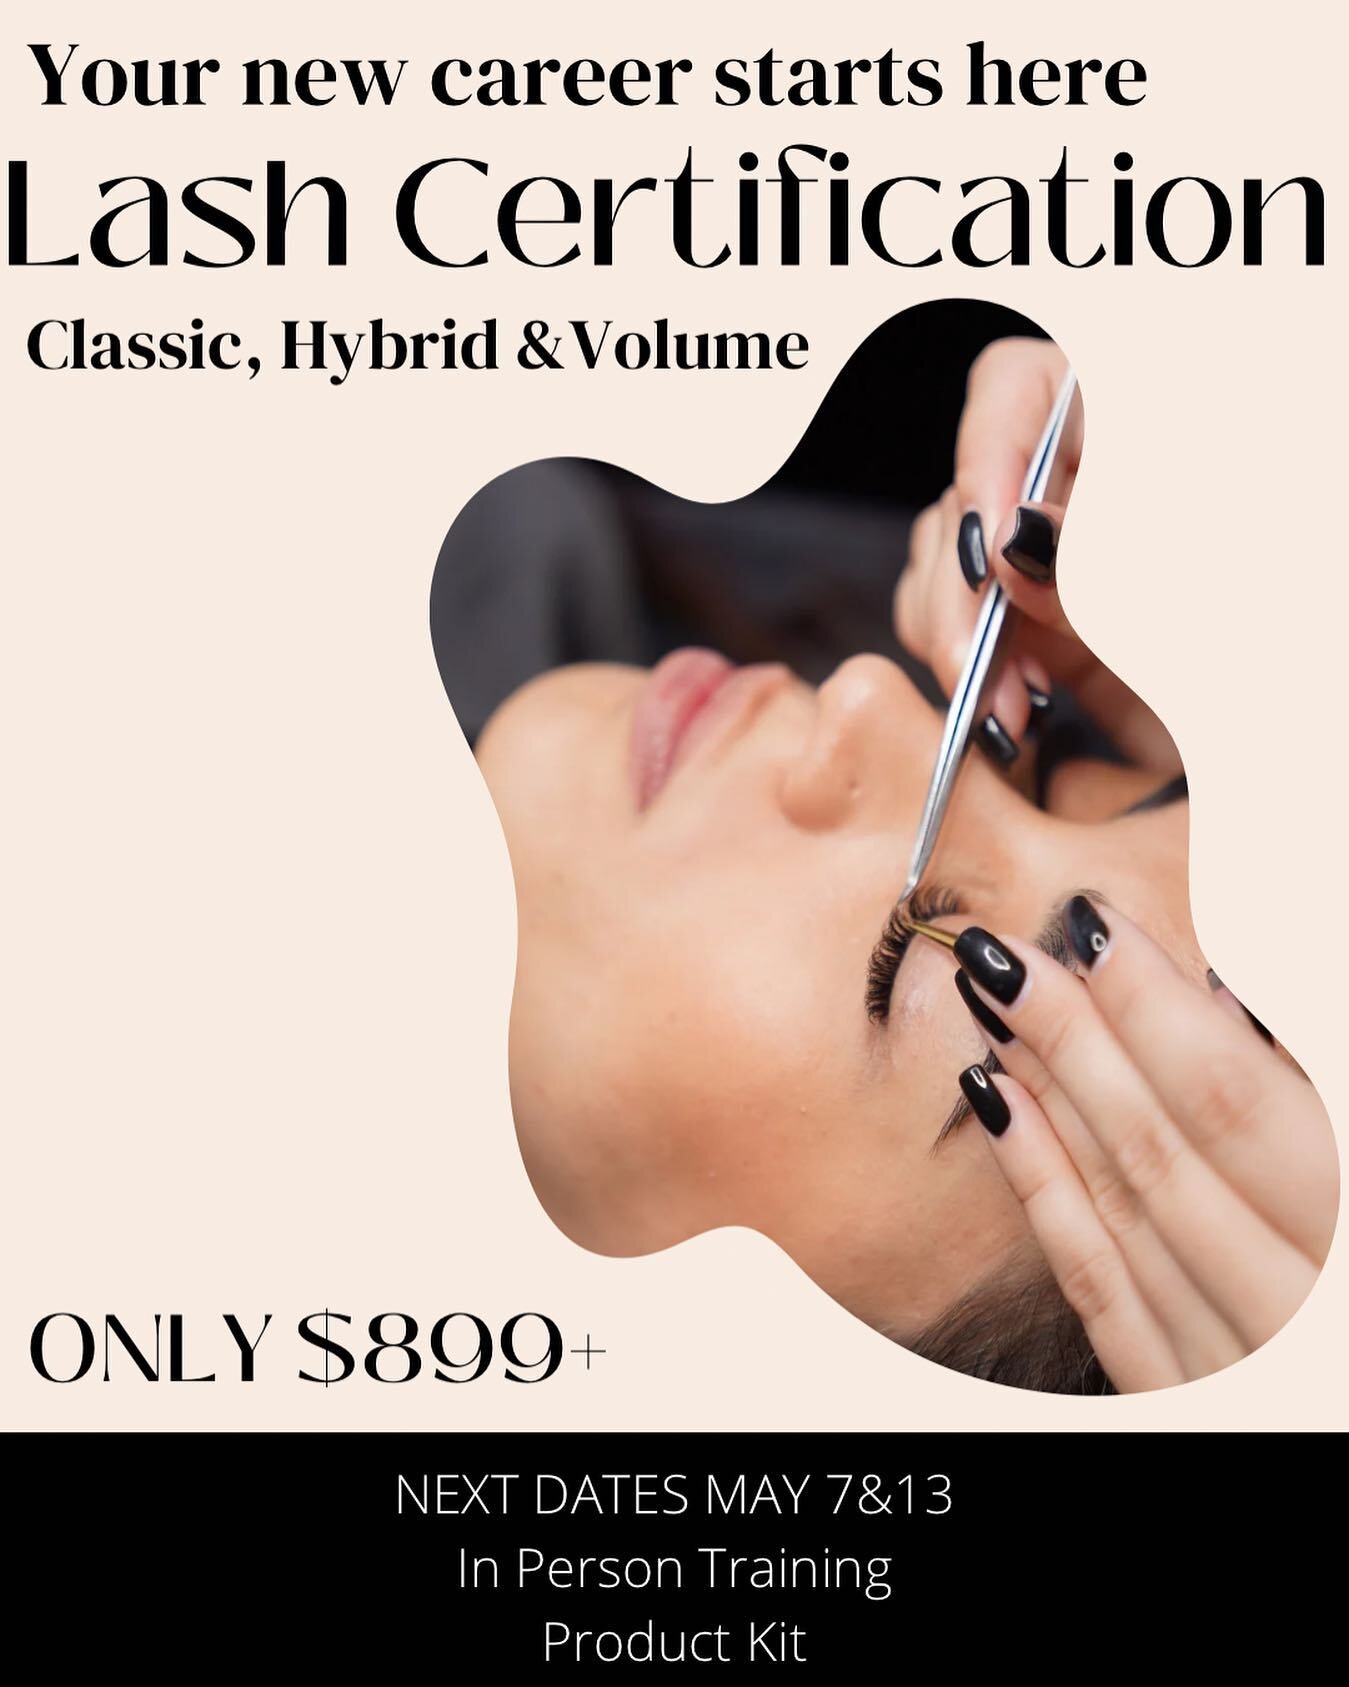 Are you ready to start your new career? Be your own boss? Choose your Own hours? Let me help you!
#lashtraining #lashboss #girlboss #newcareer #niagaralashes #niagaralashtraining